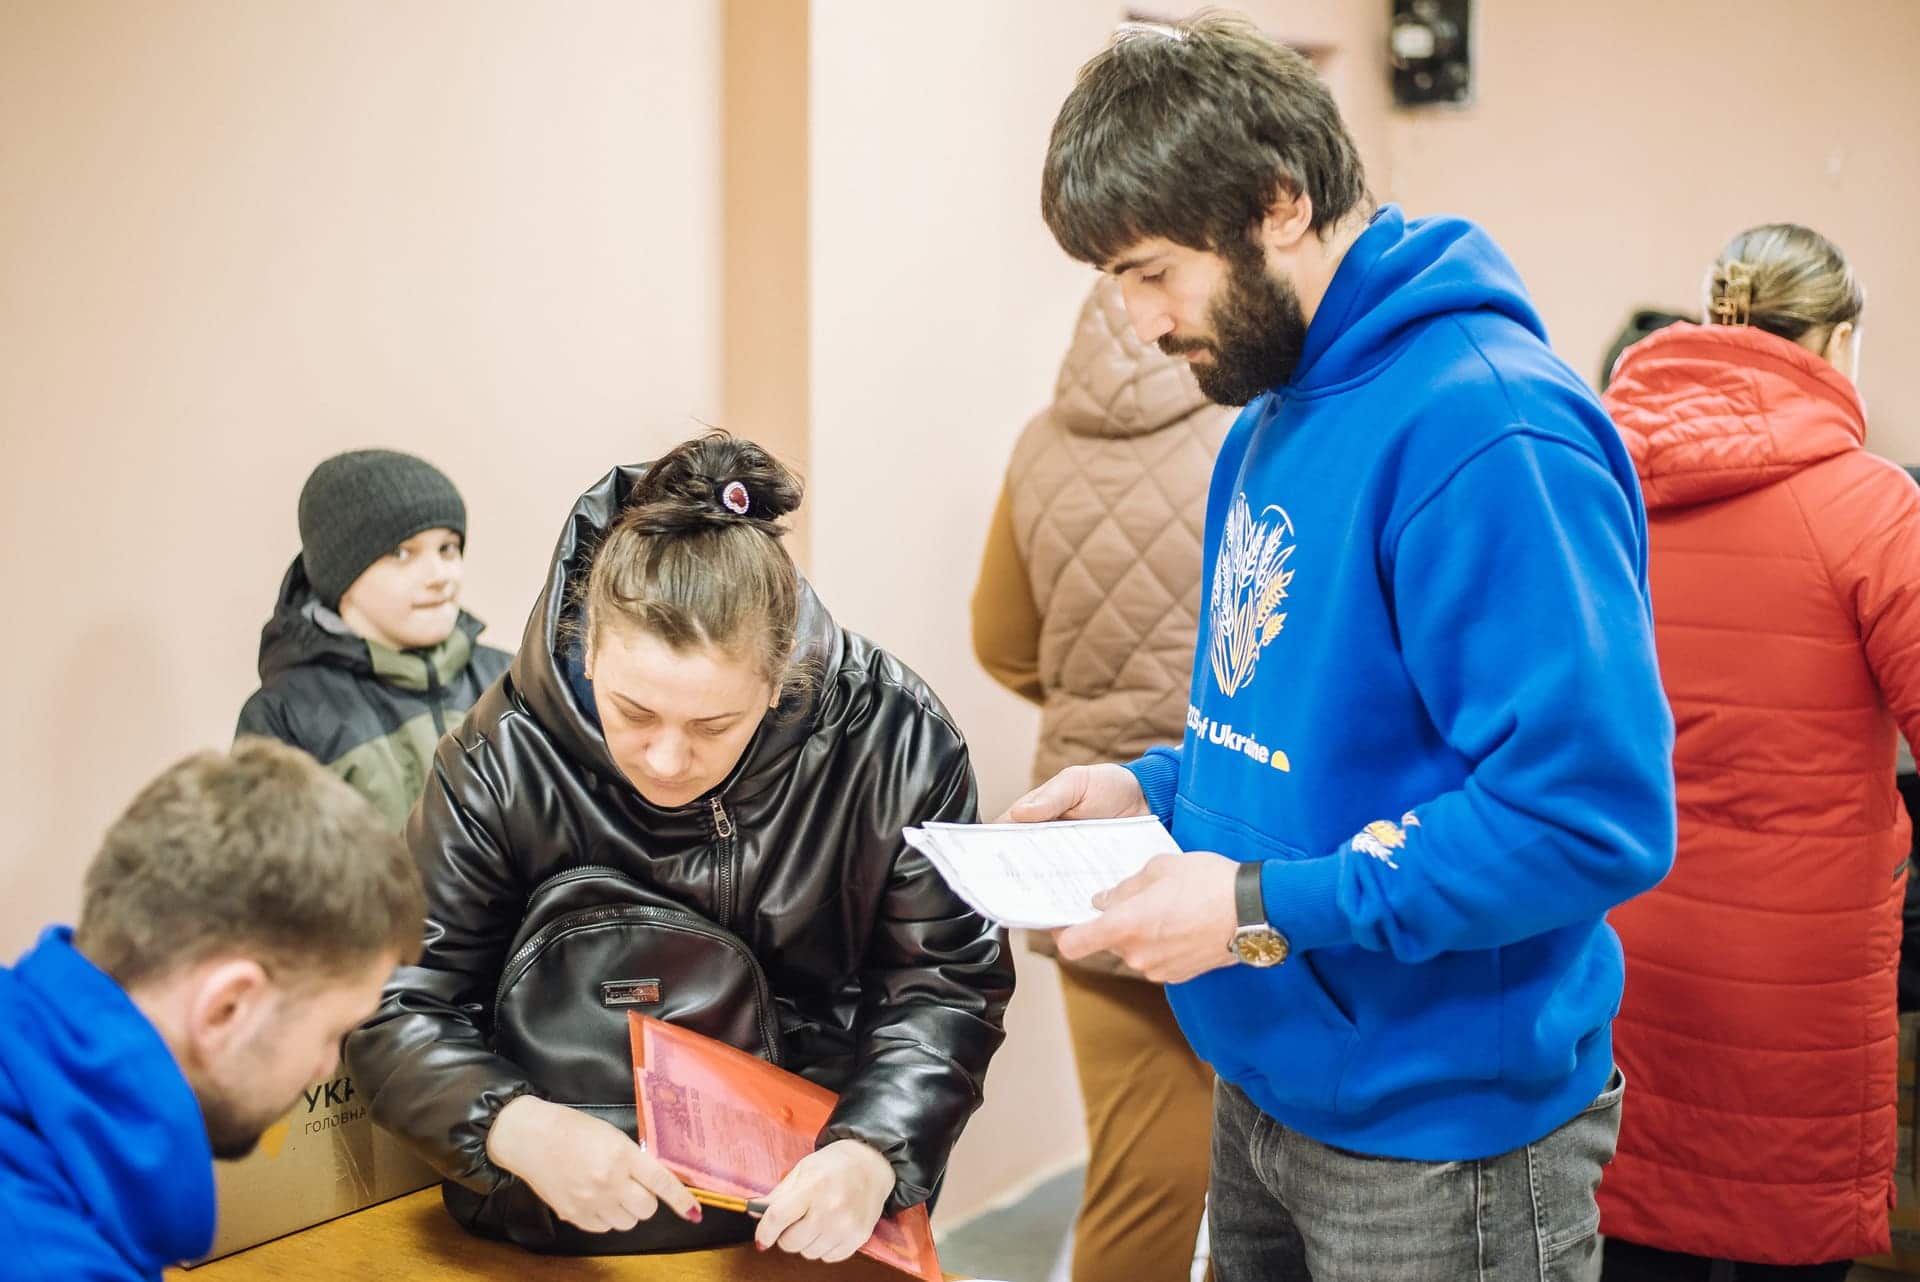 Assistance to IDPs and refugees from Rise of Ukraine charitable foundation - Rise of Ukraine